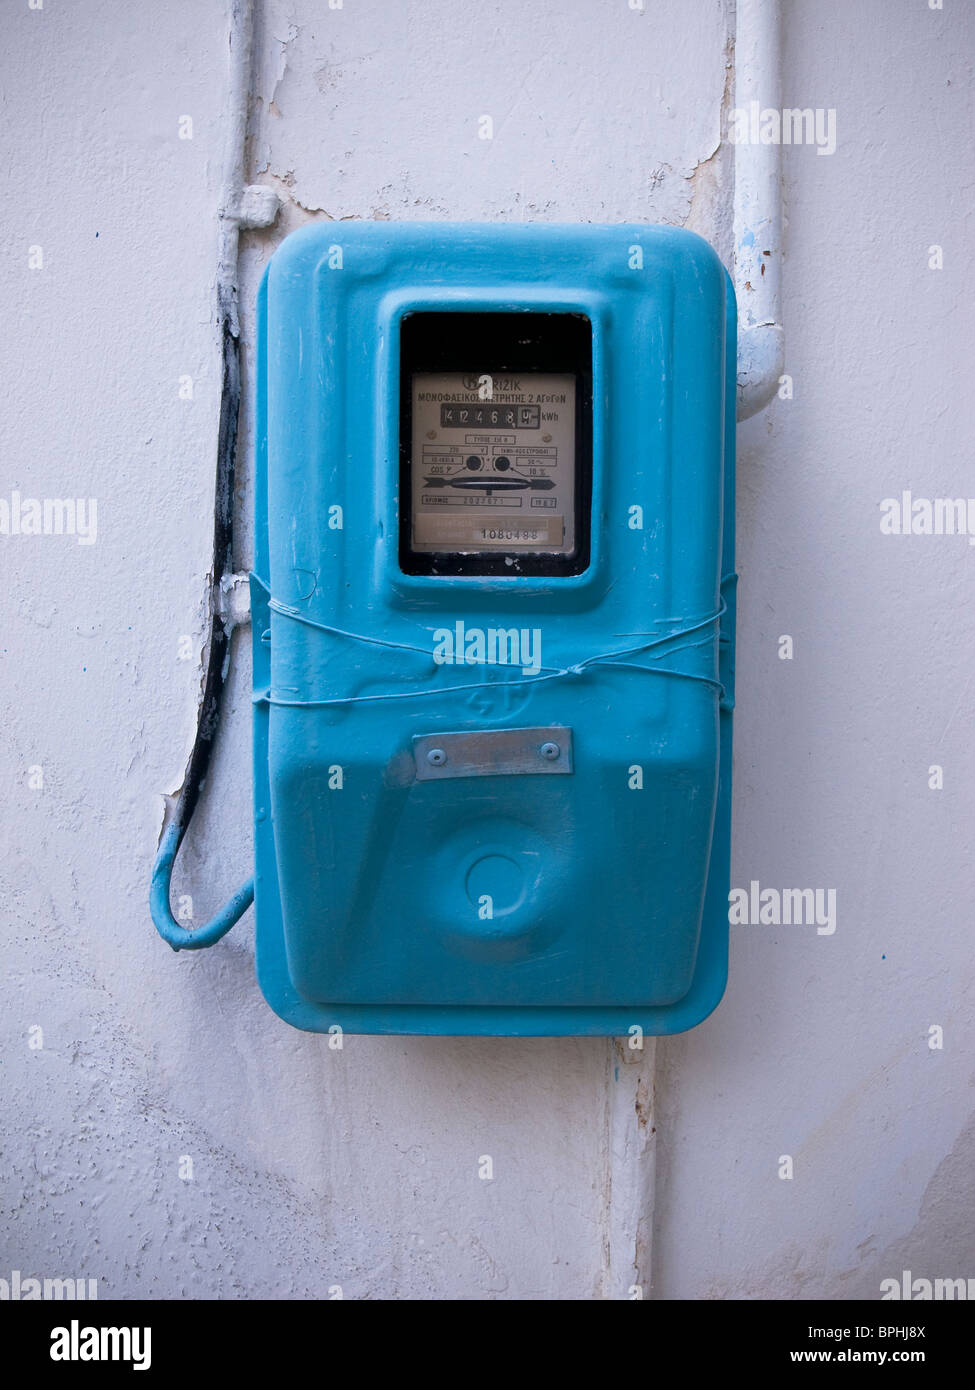 Electricity meter on wall in Greece Stock Photo